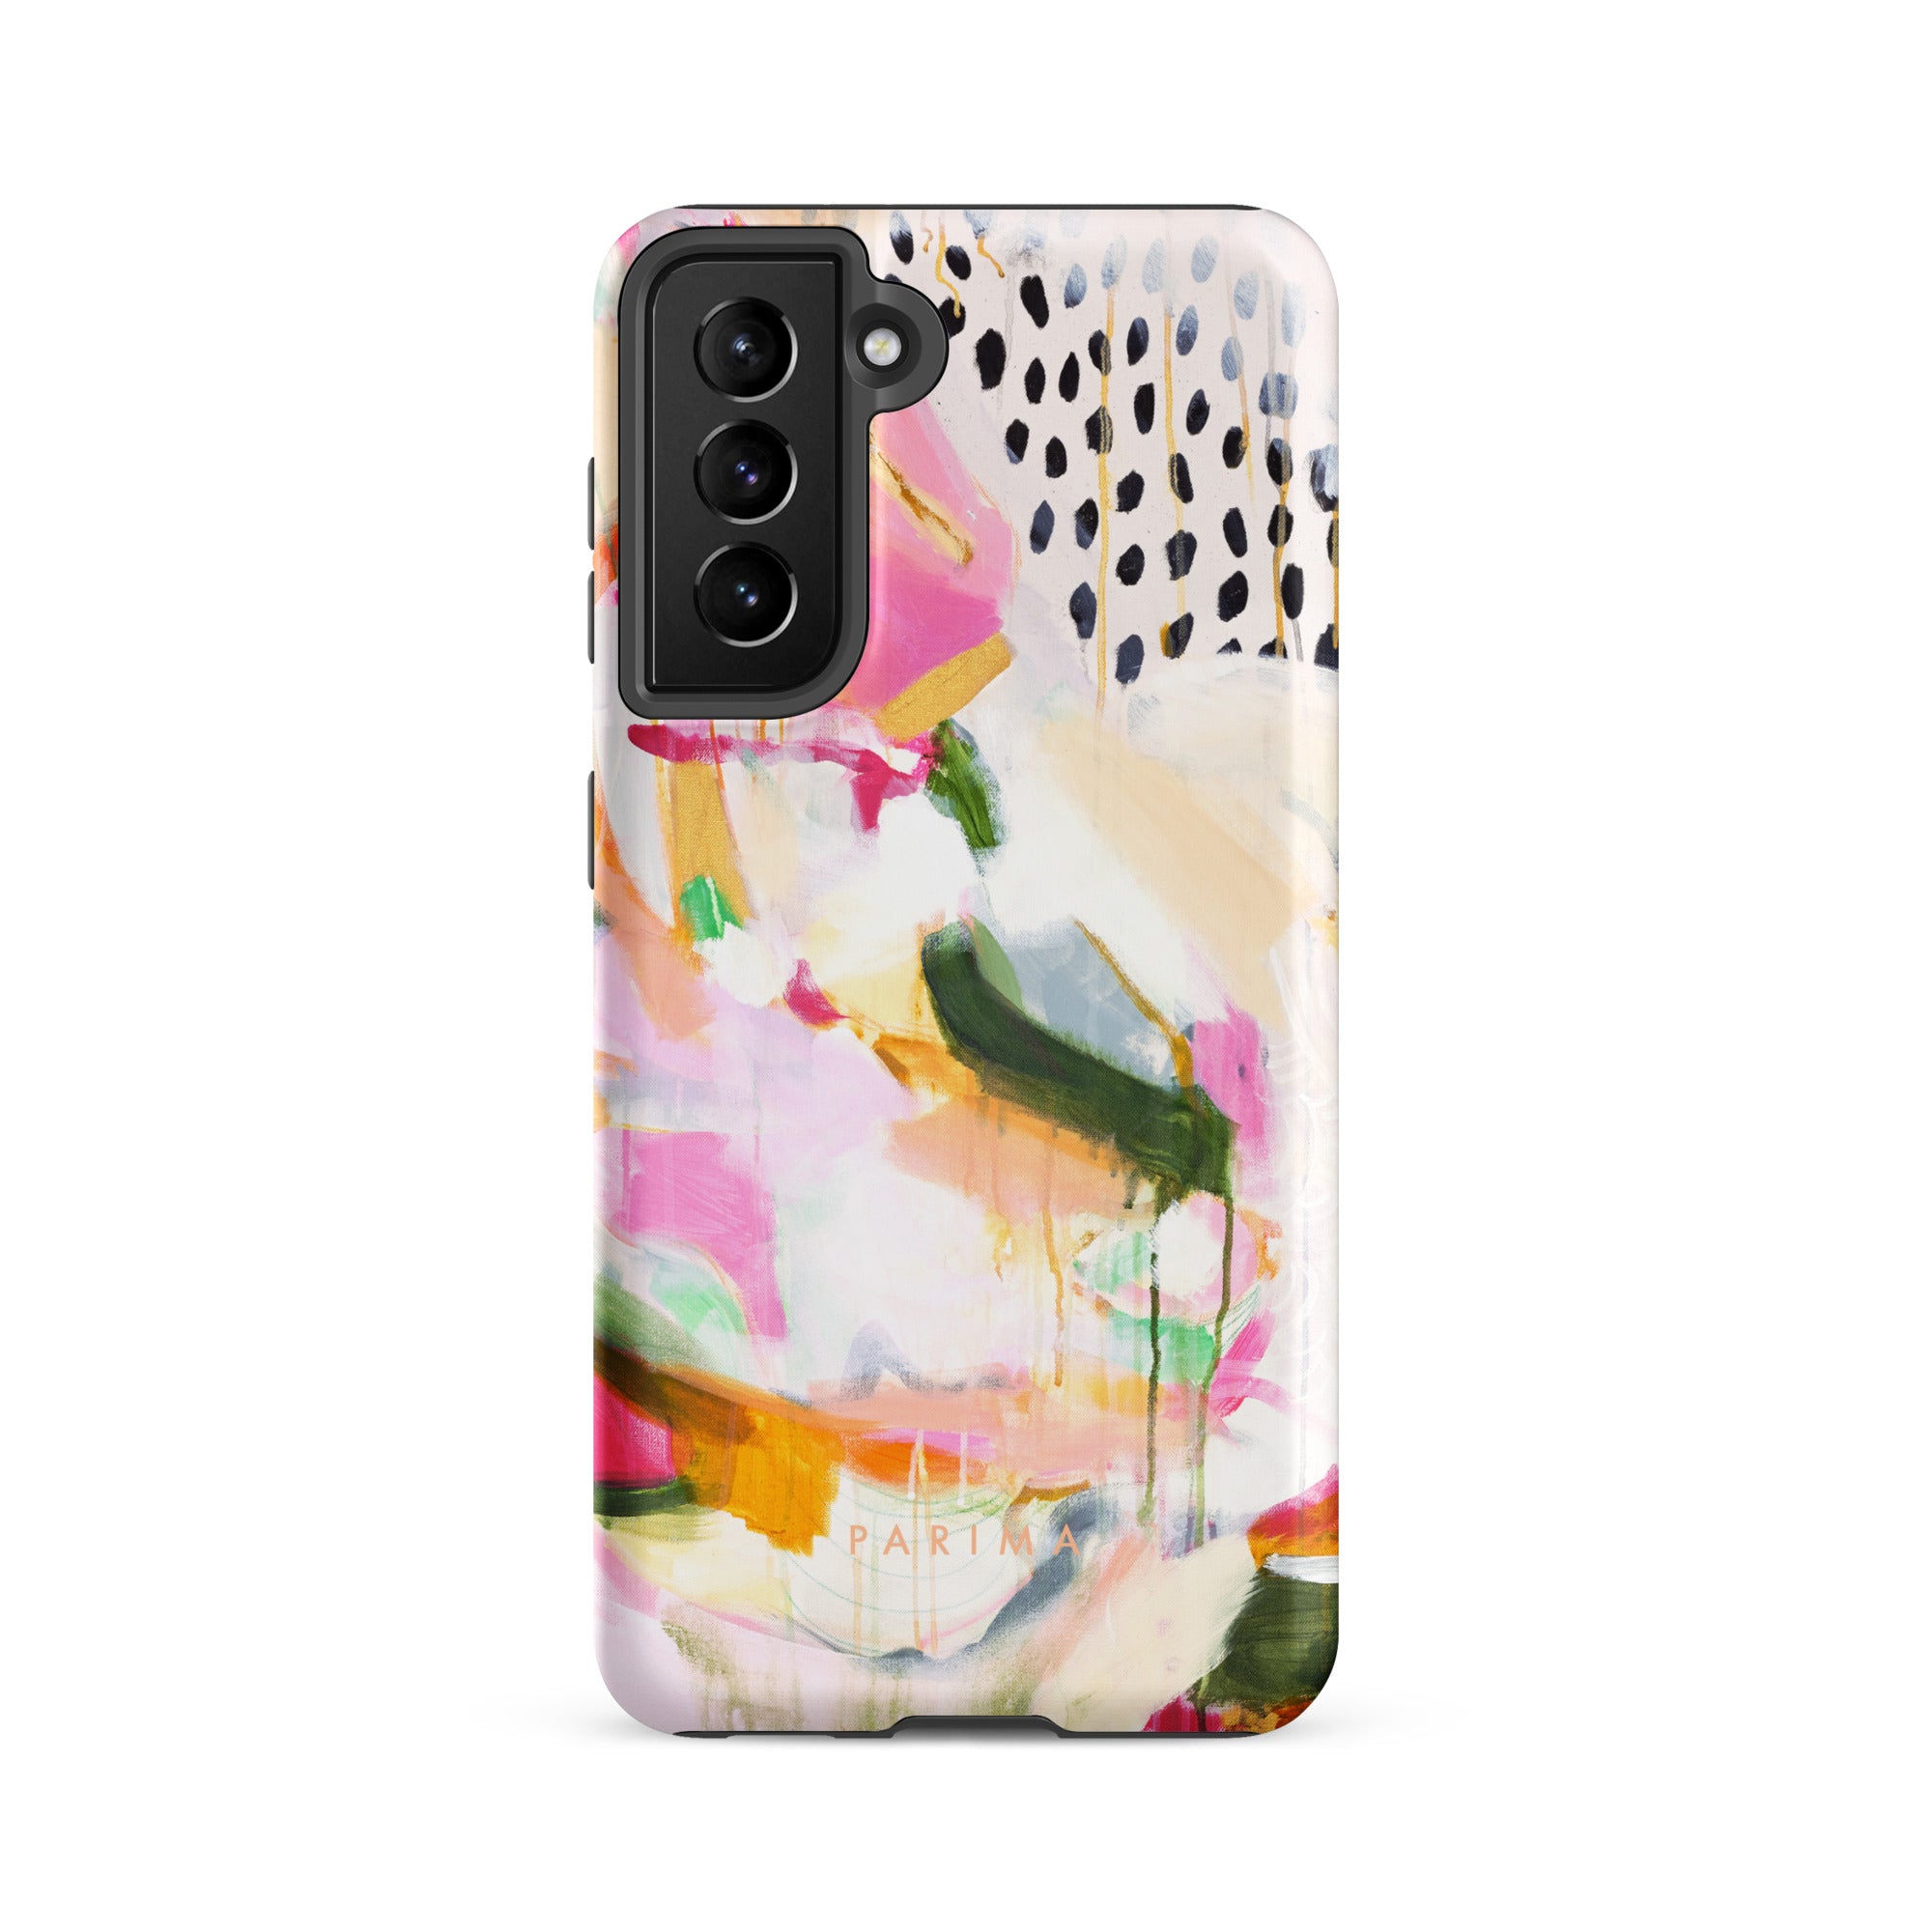 Adira, pink and green abstract art on Samsung Galaxy S21 FE tough case by Parima Studio